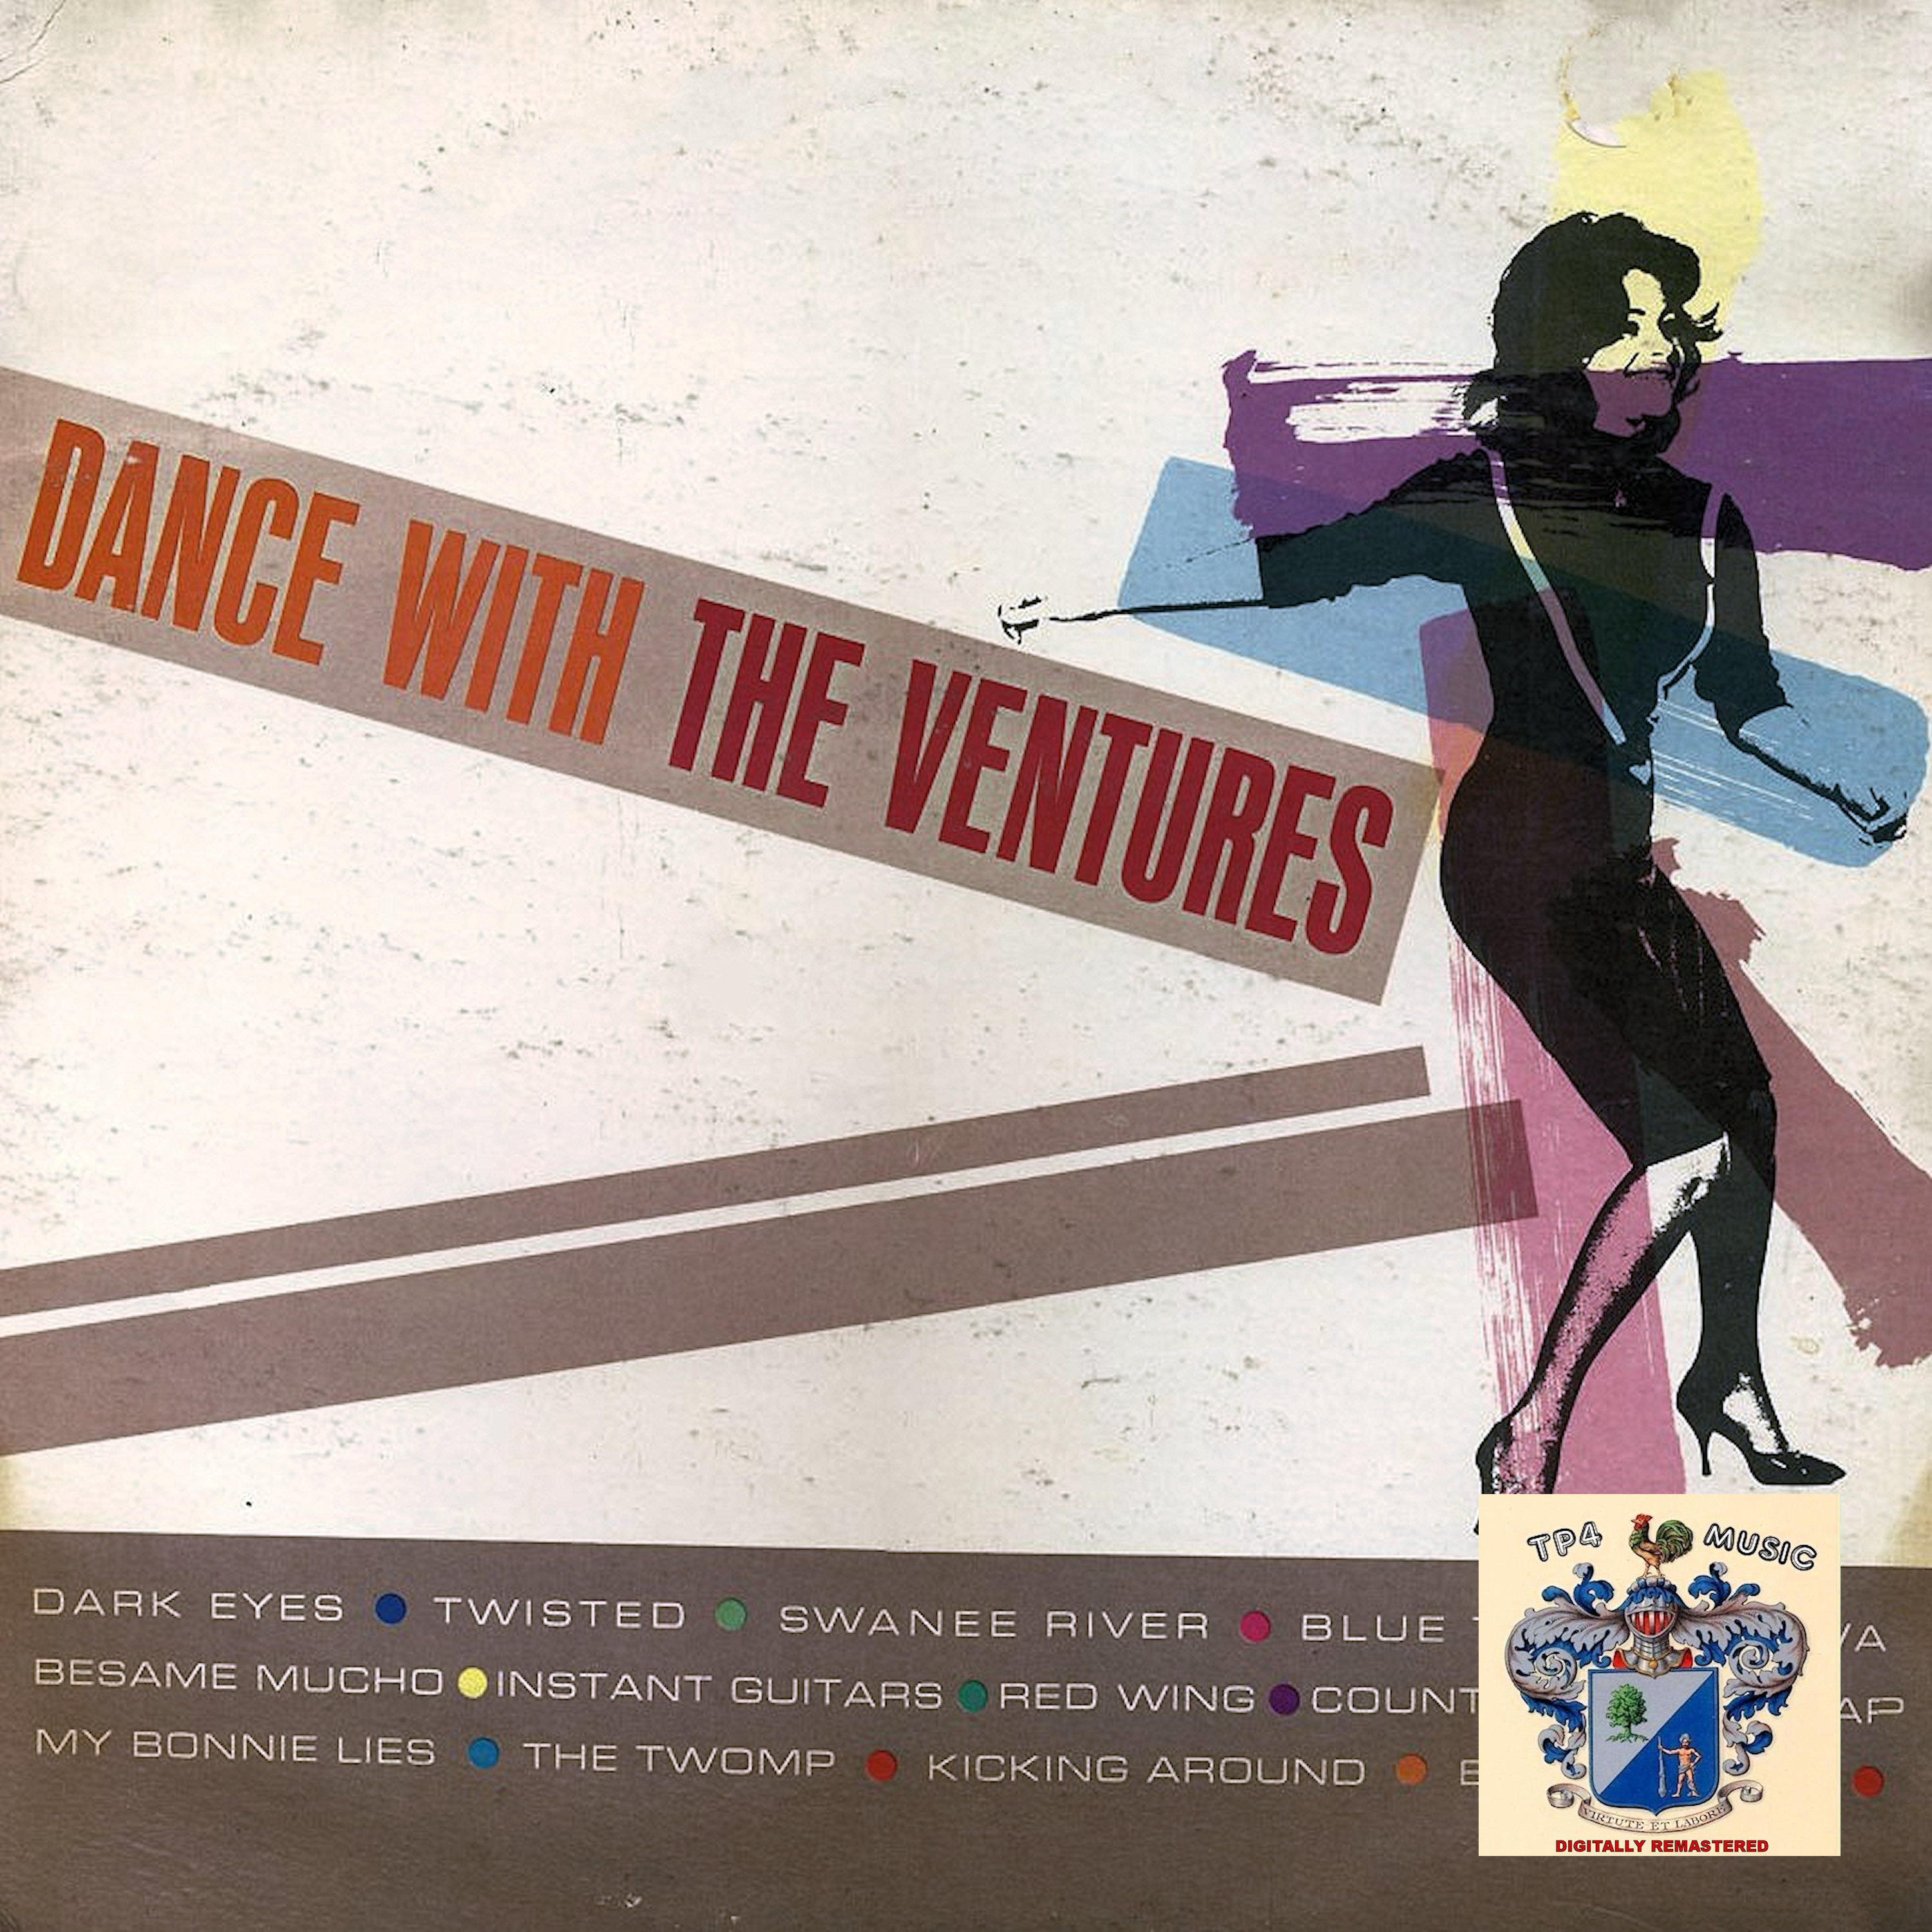 Dance with the Ventures